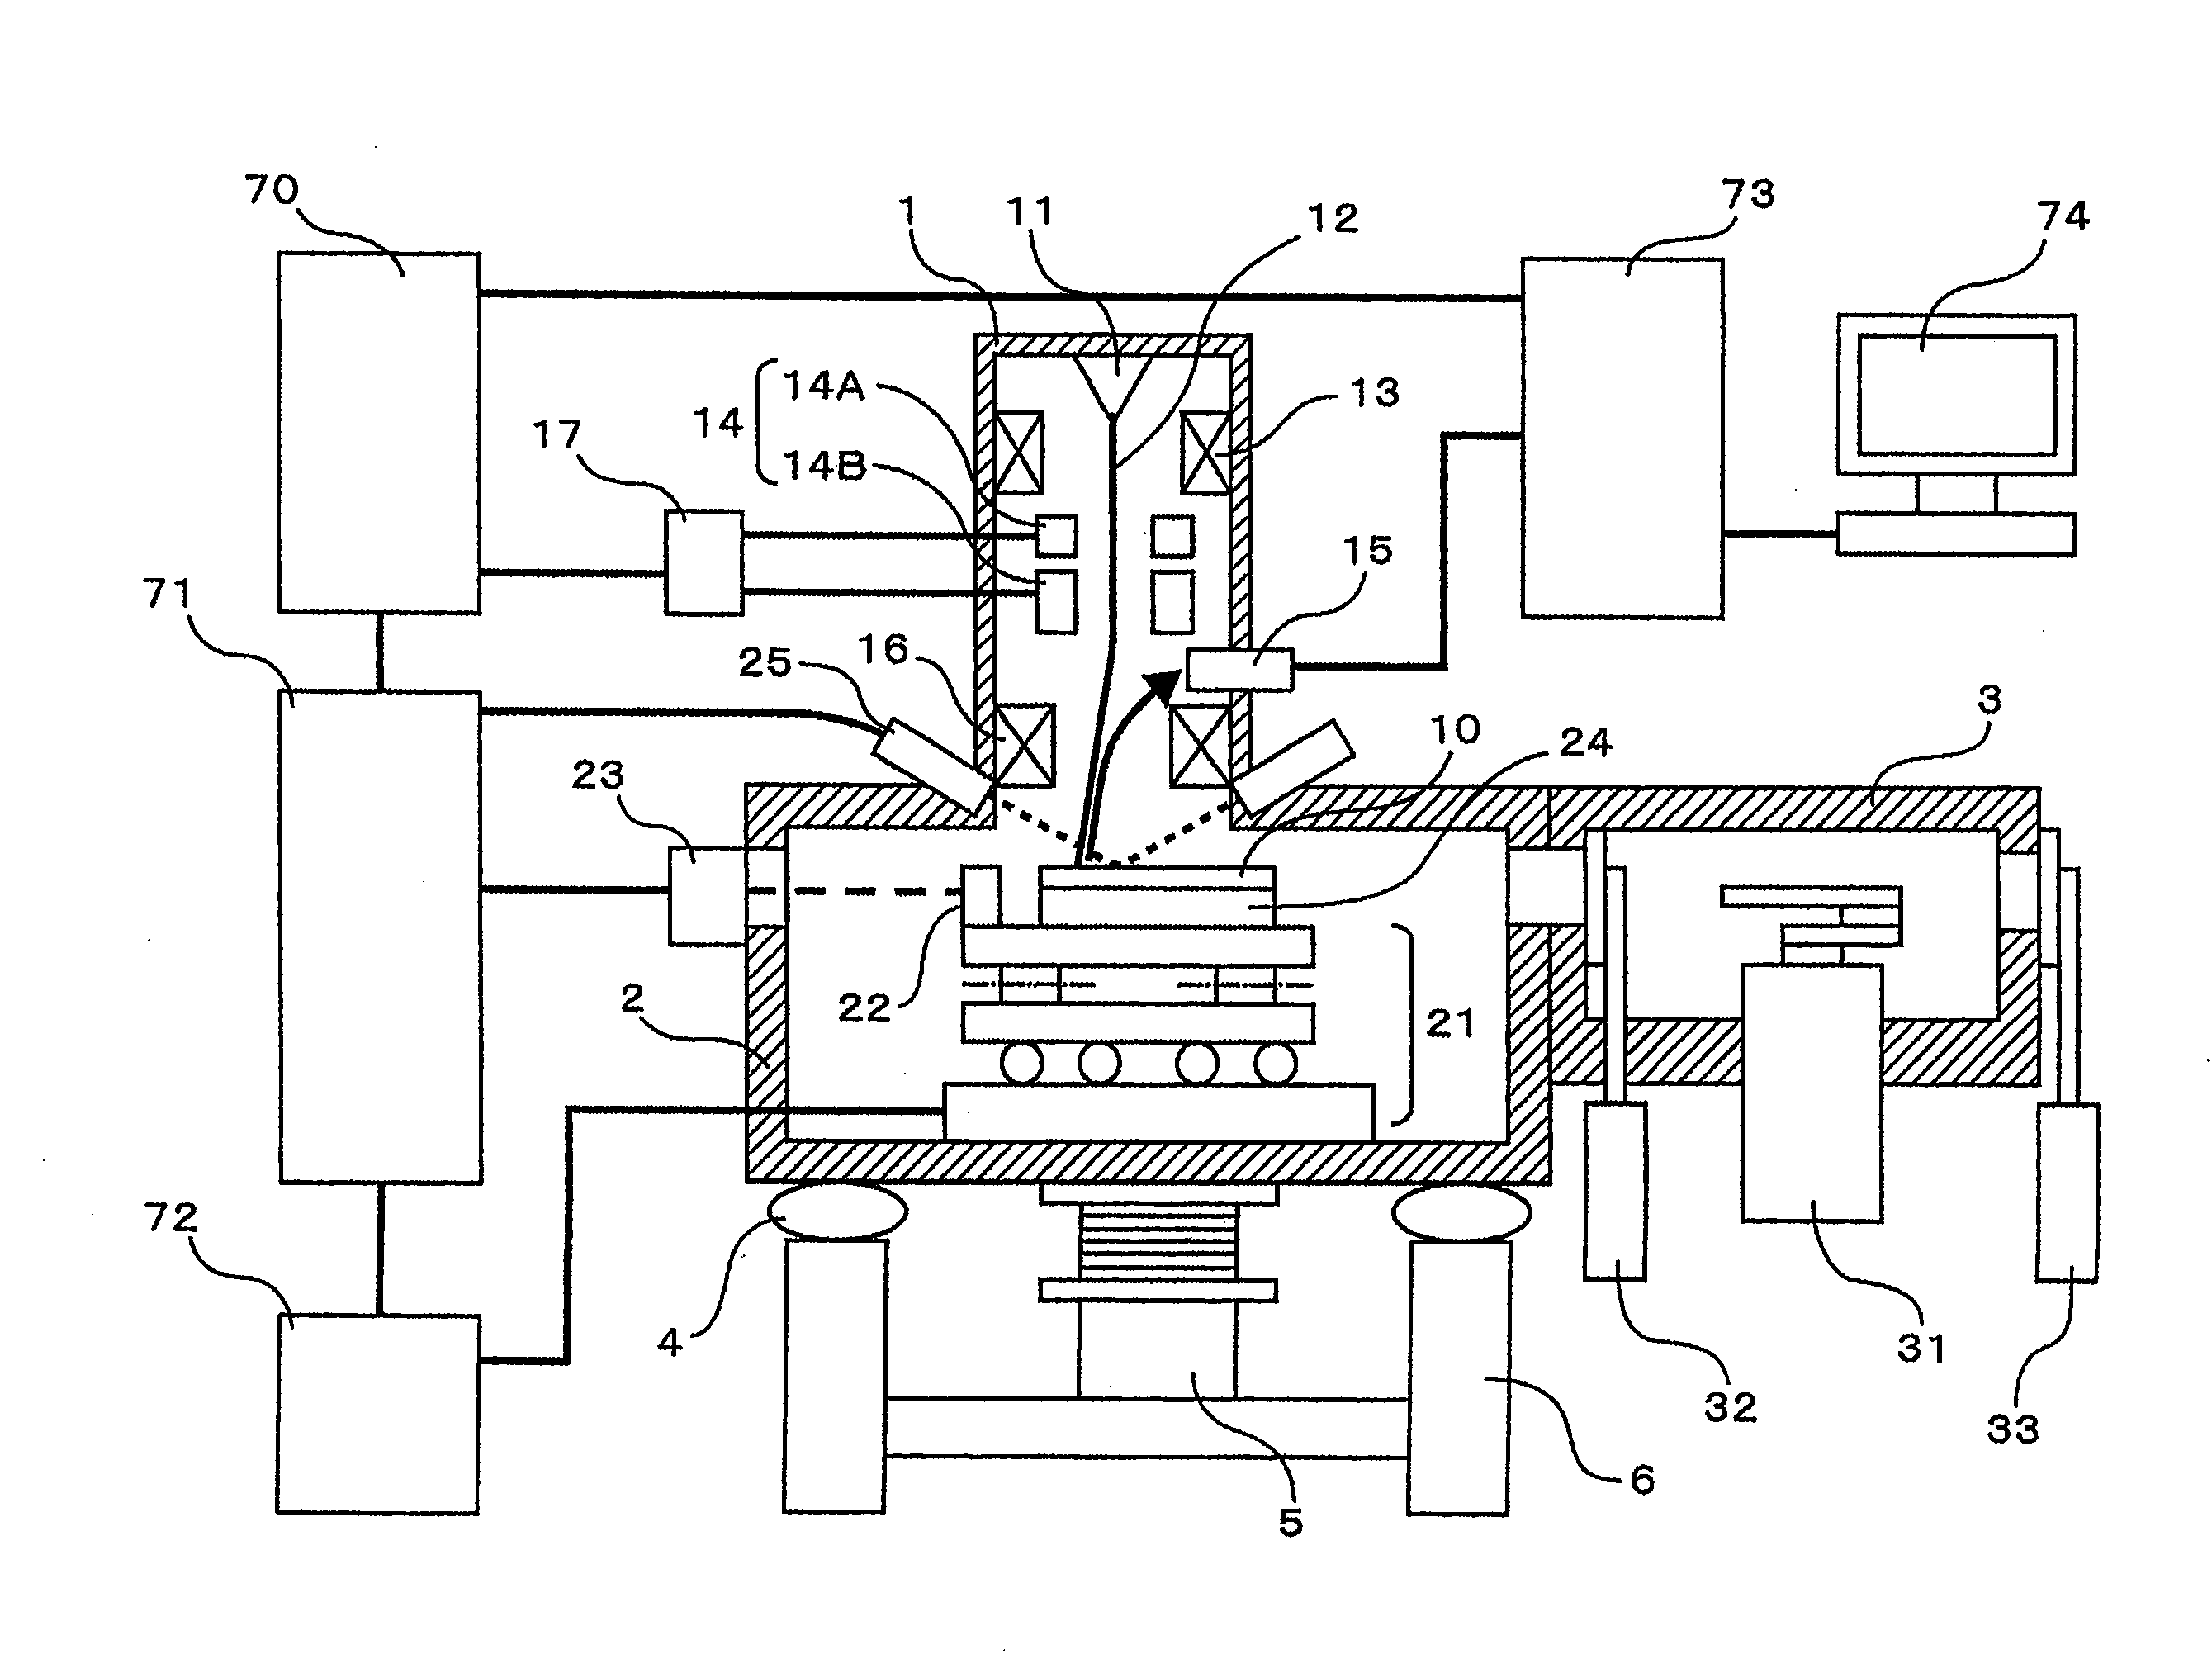 Charged particle beam application apparatus